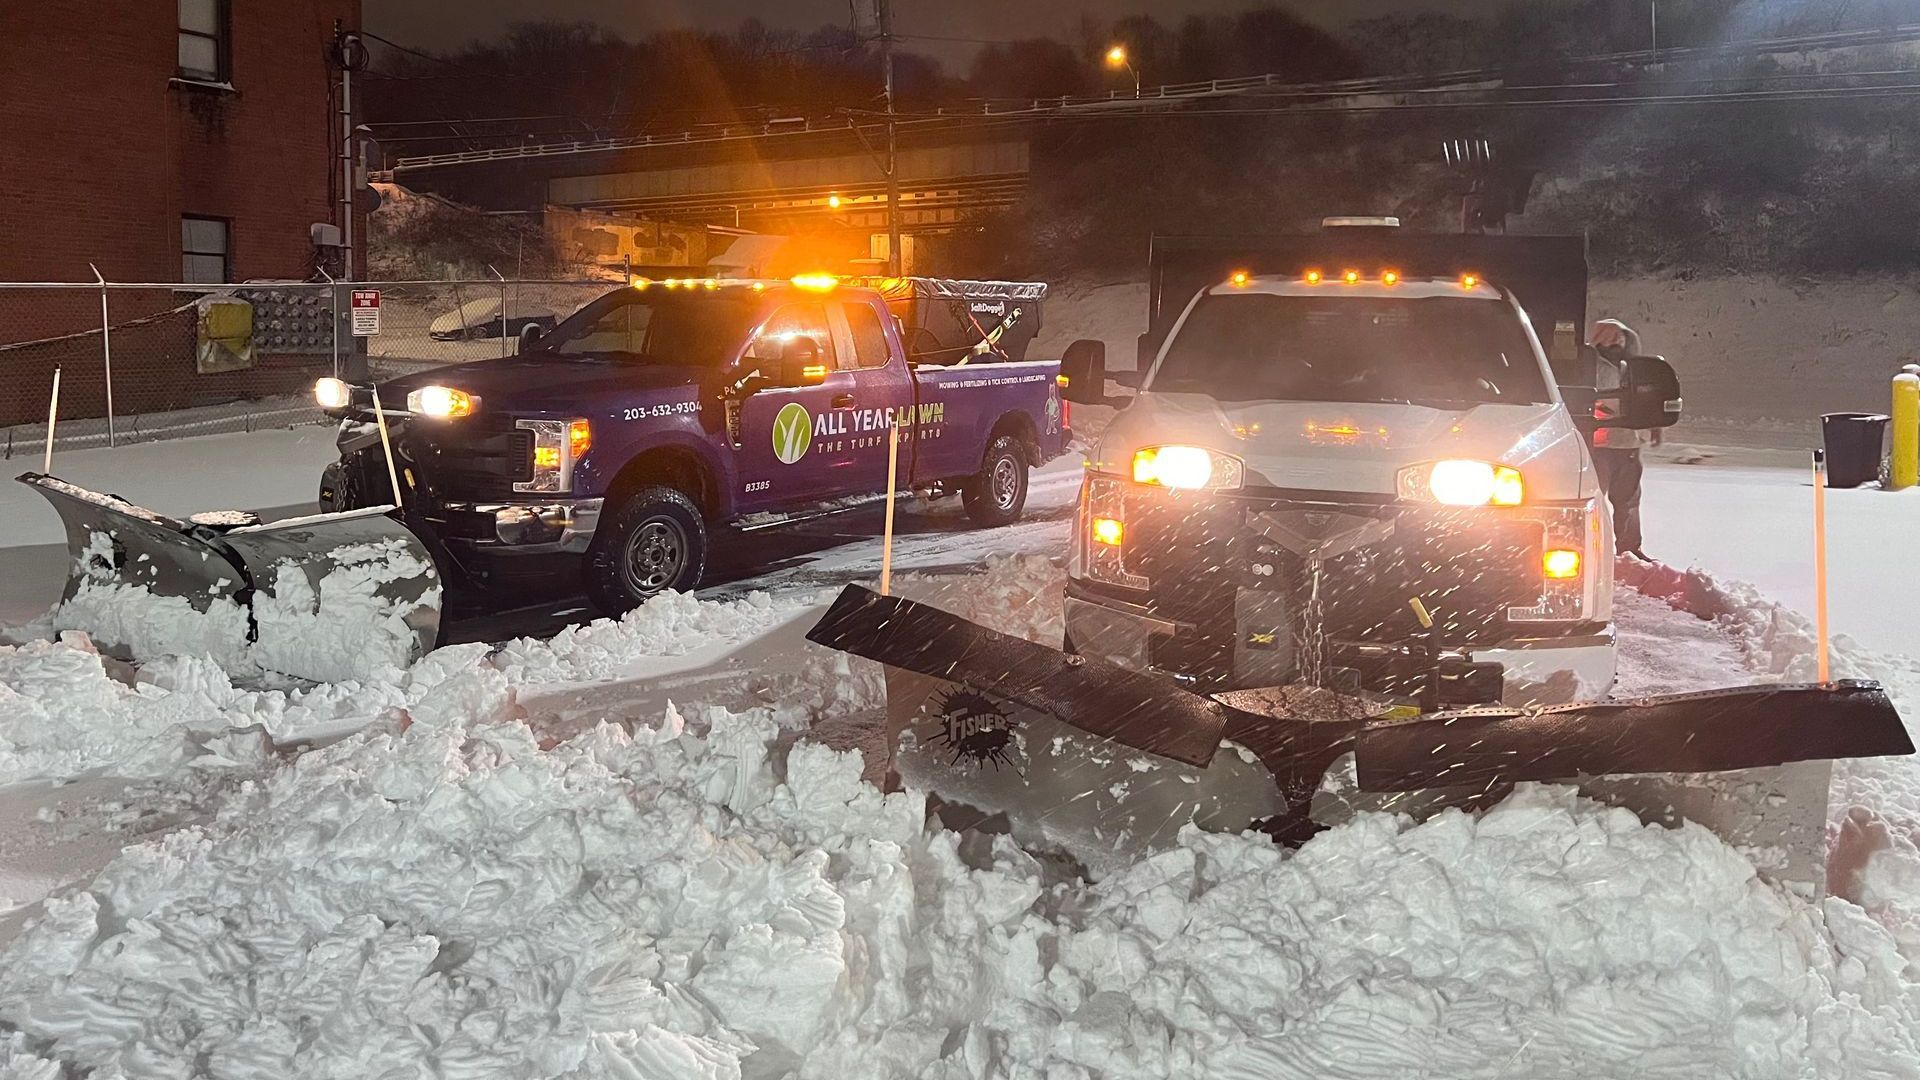 two snow plows are plowing snow in a parking lot at night .